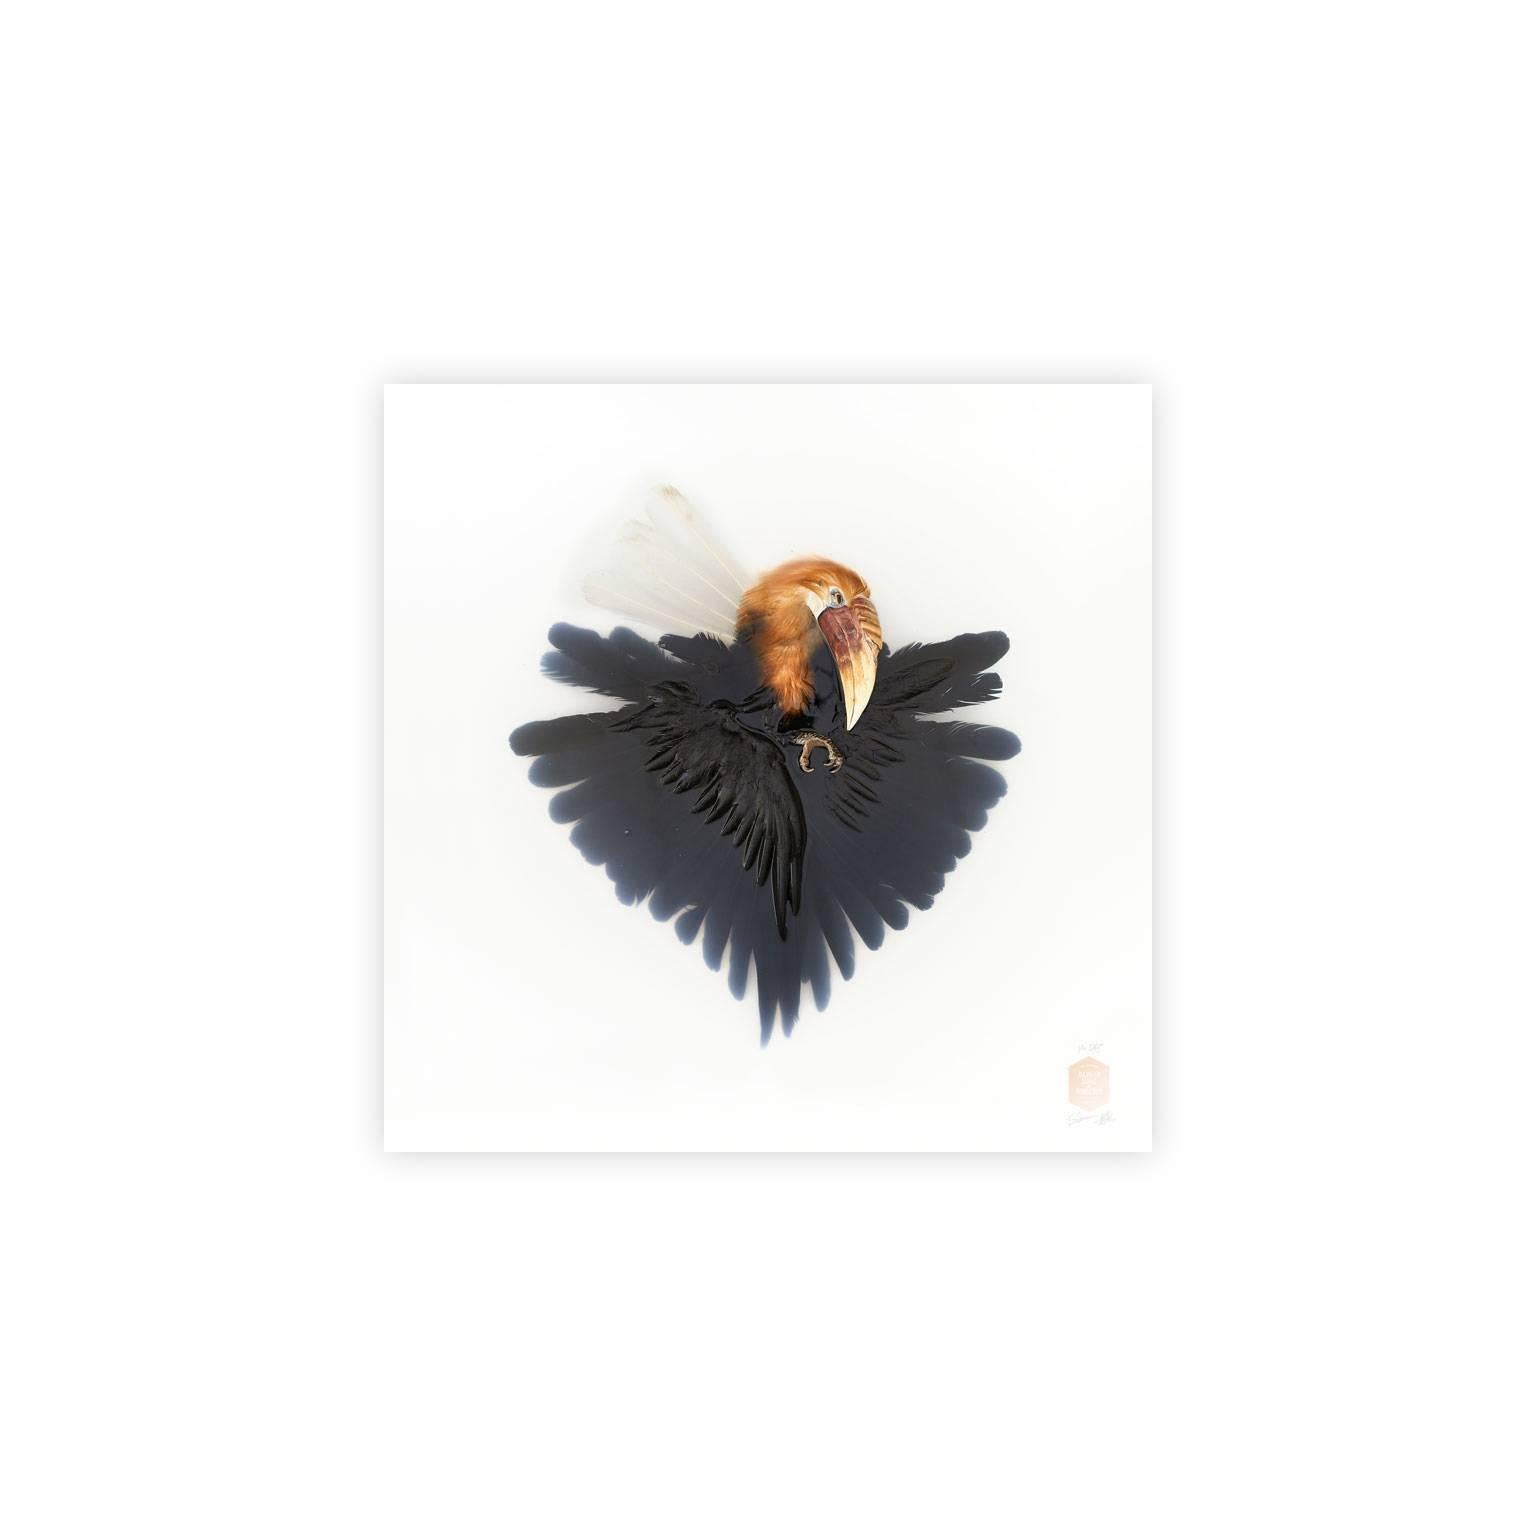 Unknown pose by Wreathed Hornbill is nr. 4/10.

Size:
40 x 40 cm (15.7 x 15.7 in).
Size Framed (optional).
48 x 48 cm (19 x 19 in).
 
Medium
Giclée Fine Art Print on Hahnemuehle photo rag ultra smooth.

About the Artists:
Jaap Sinke